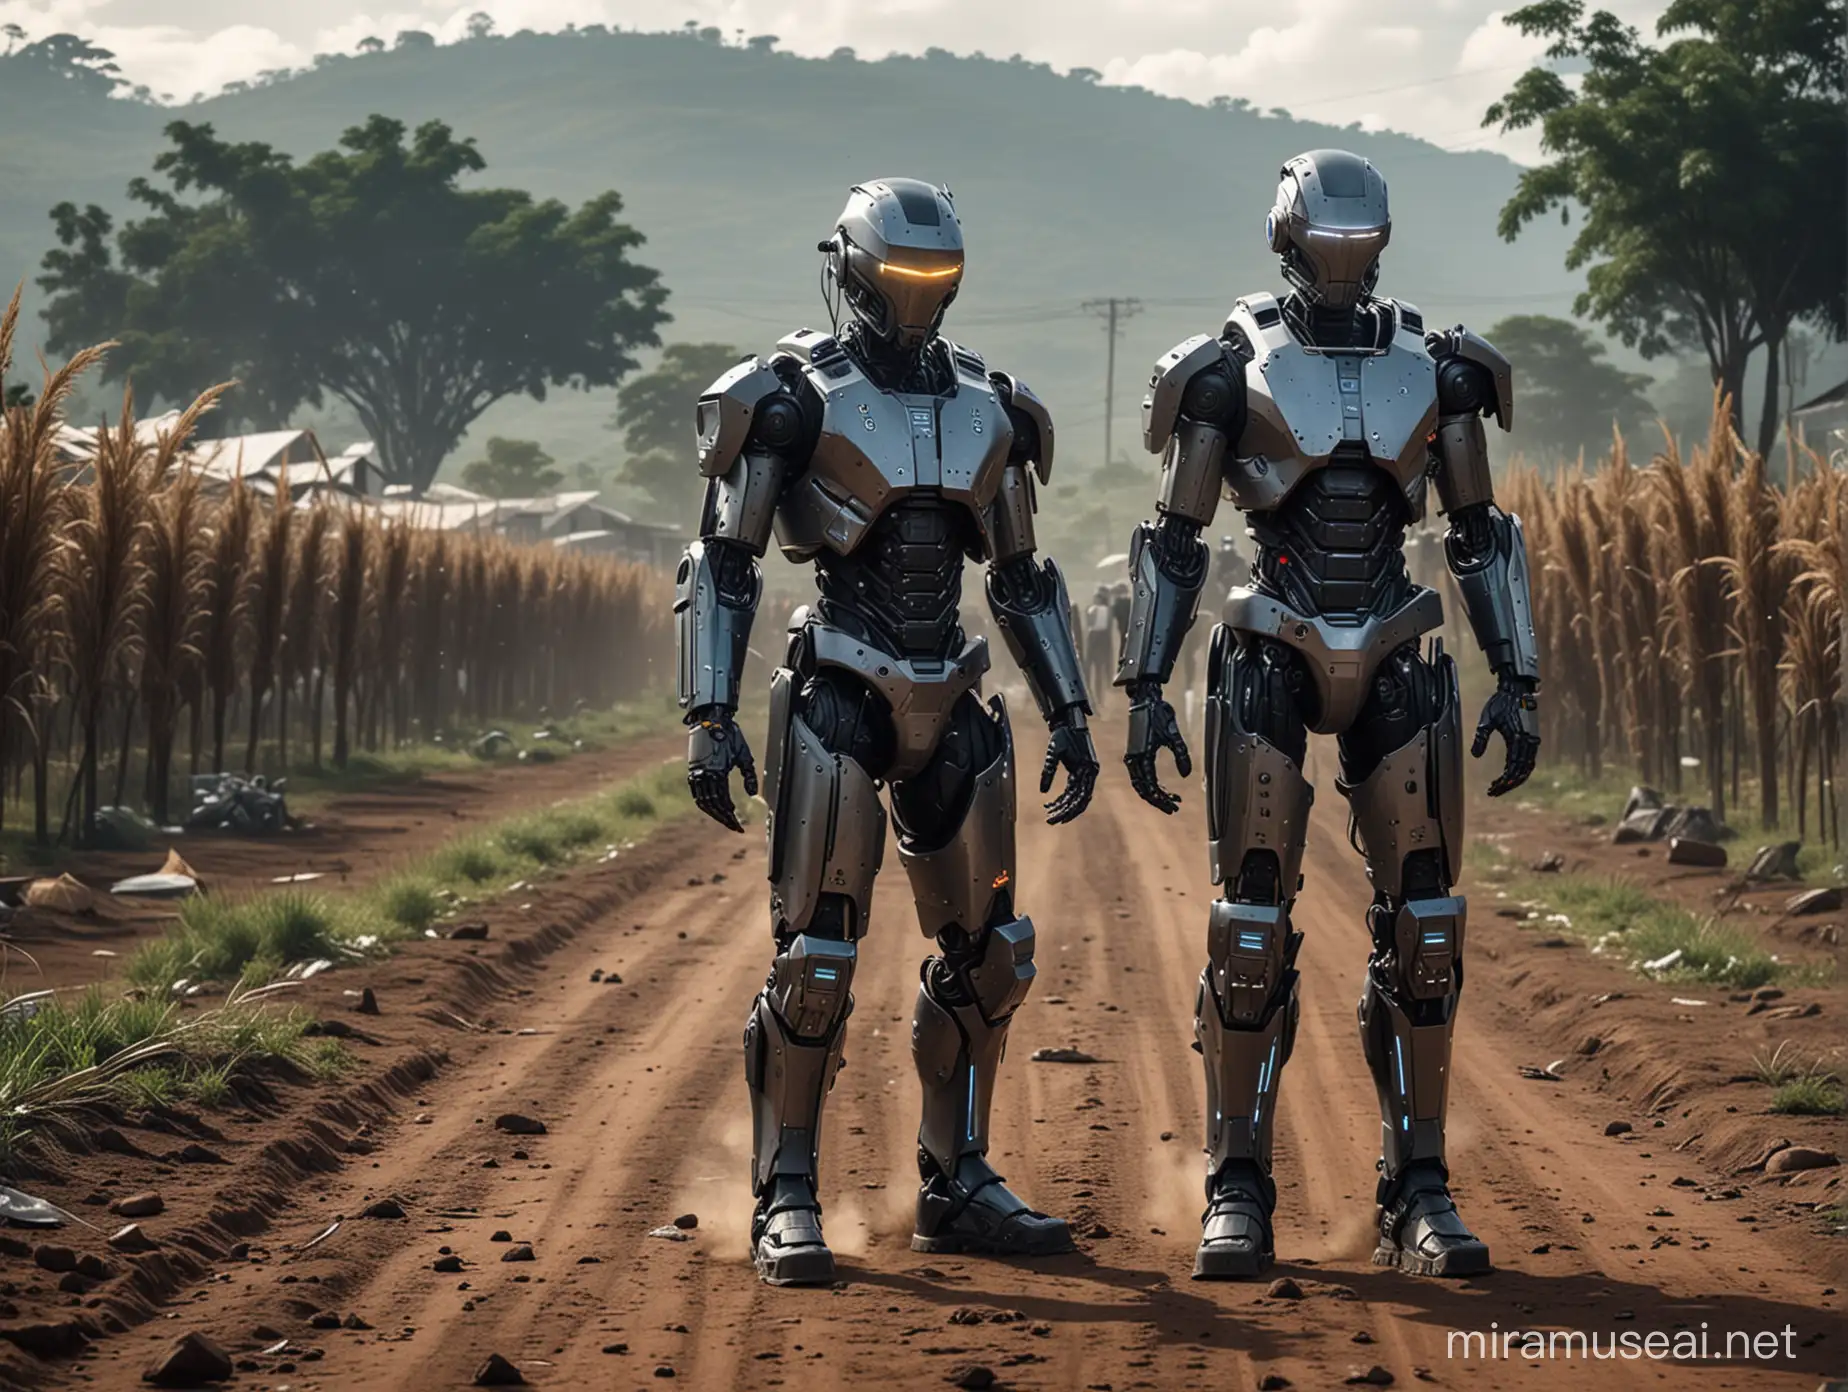 cyberpunk riot in South America of robot police fighting human farmers